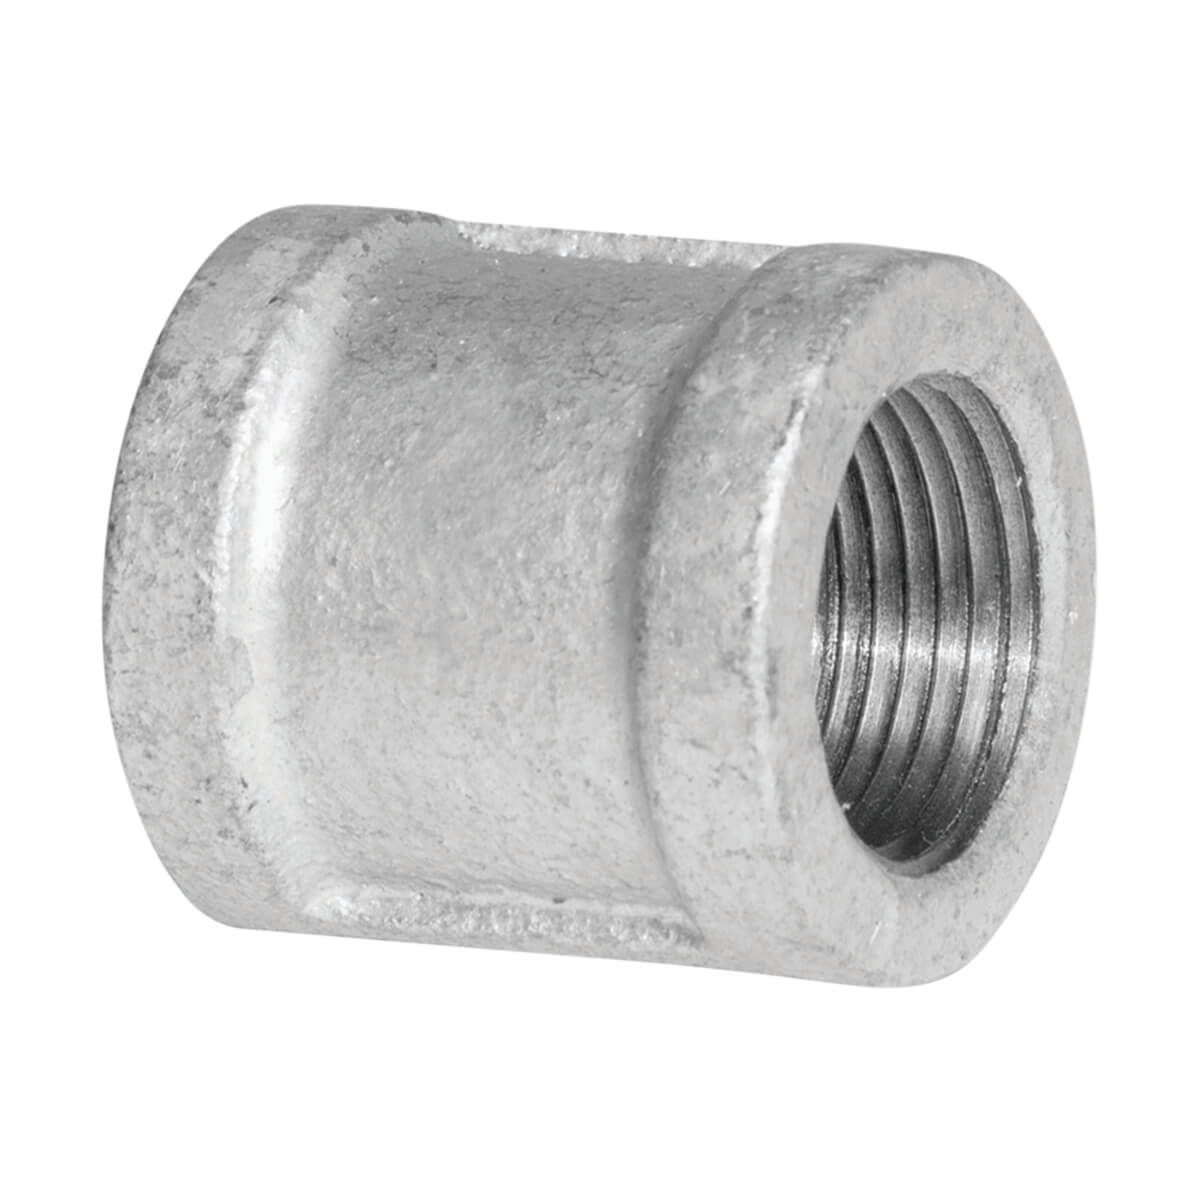 Fitting Galvanized Iron Coupling - 3/4-in